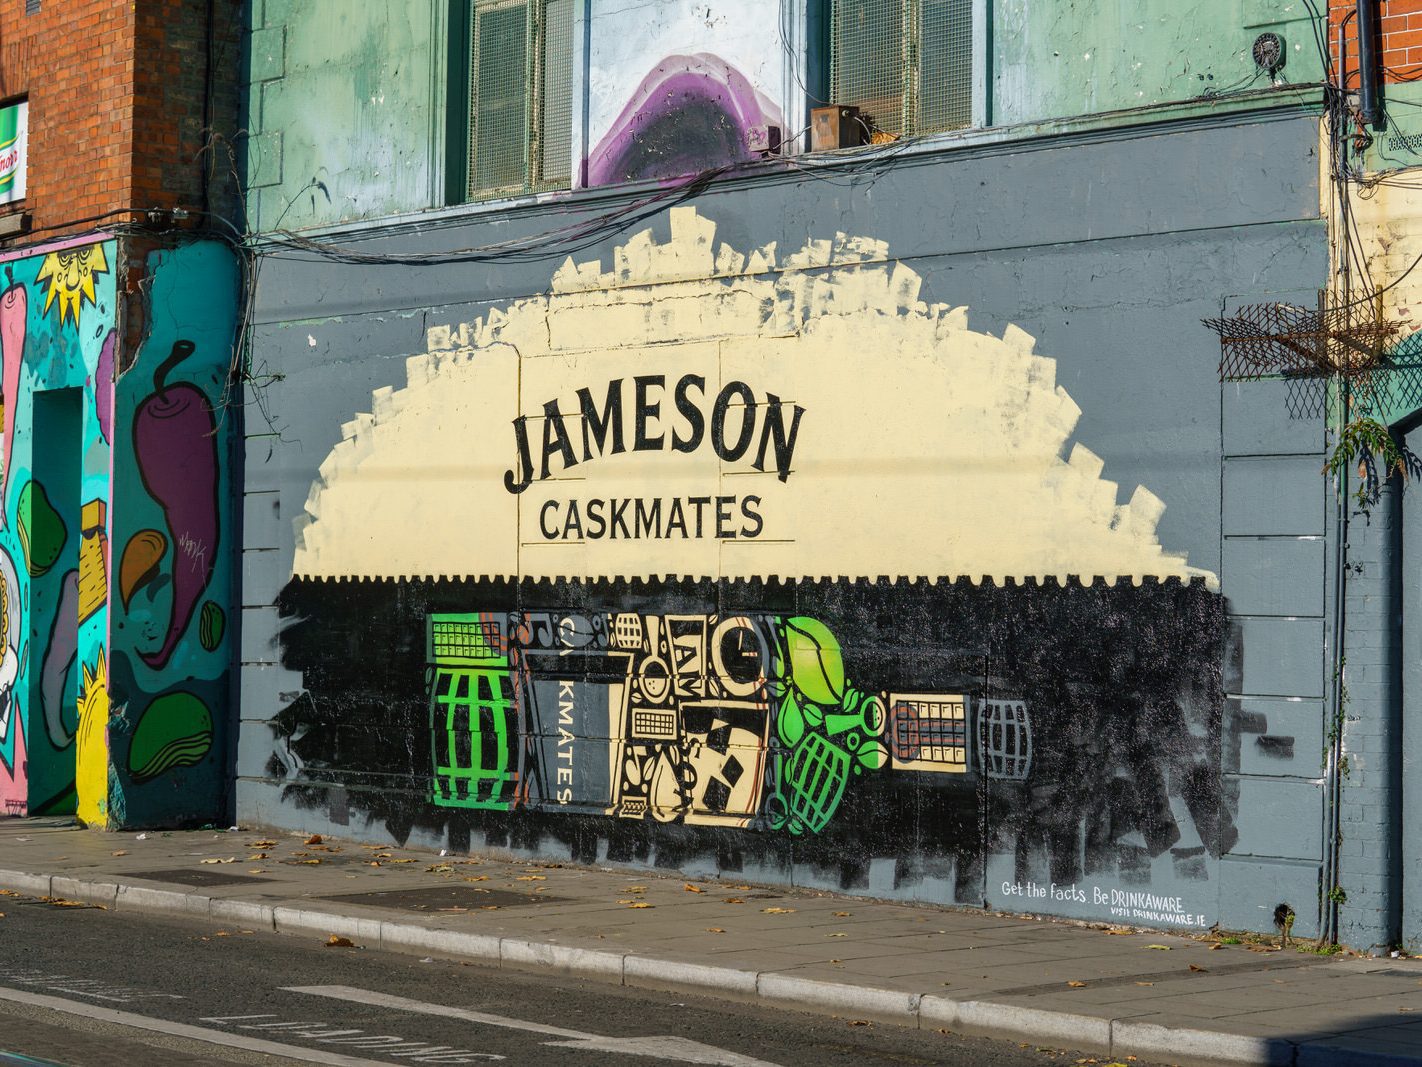 JAMESON CASKMATES THE NEW CONCEPT [COMMERCIAL STREET ART ON CHANCERY STREET]-227392-1